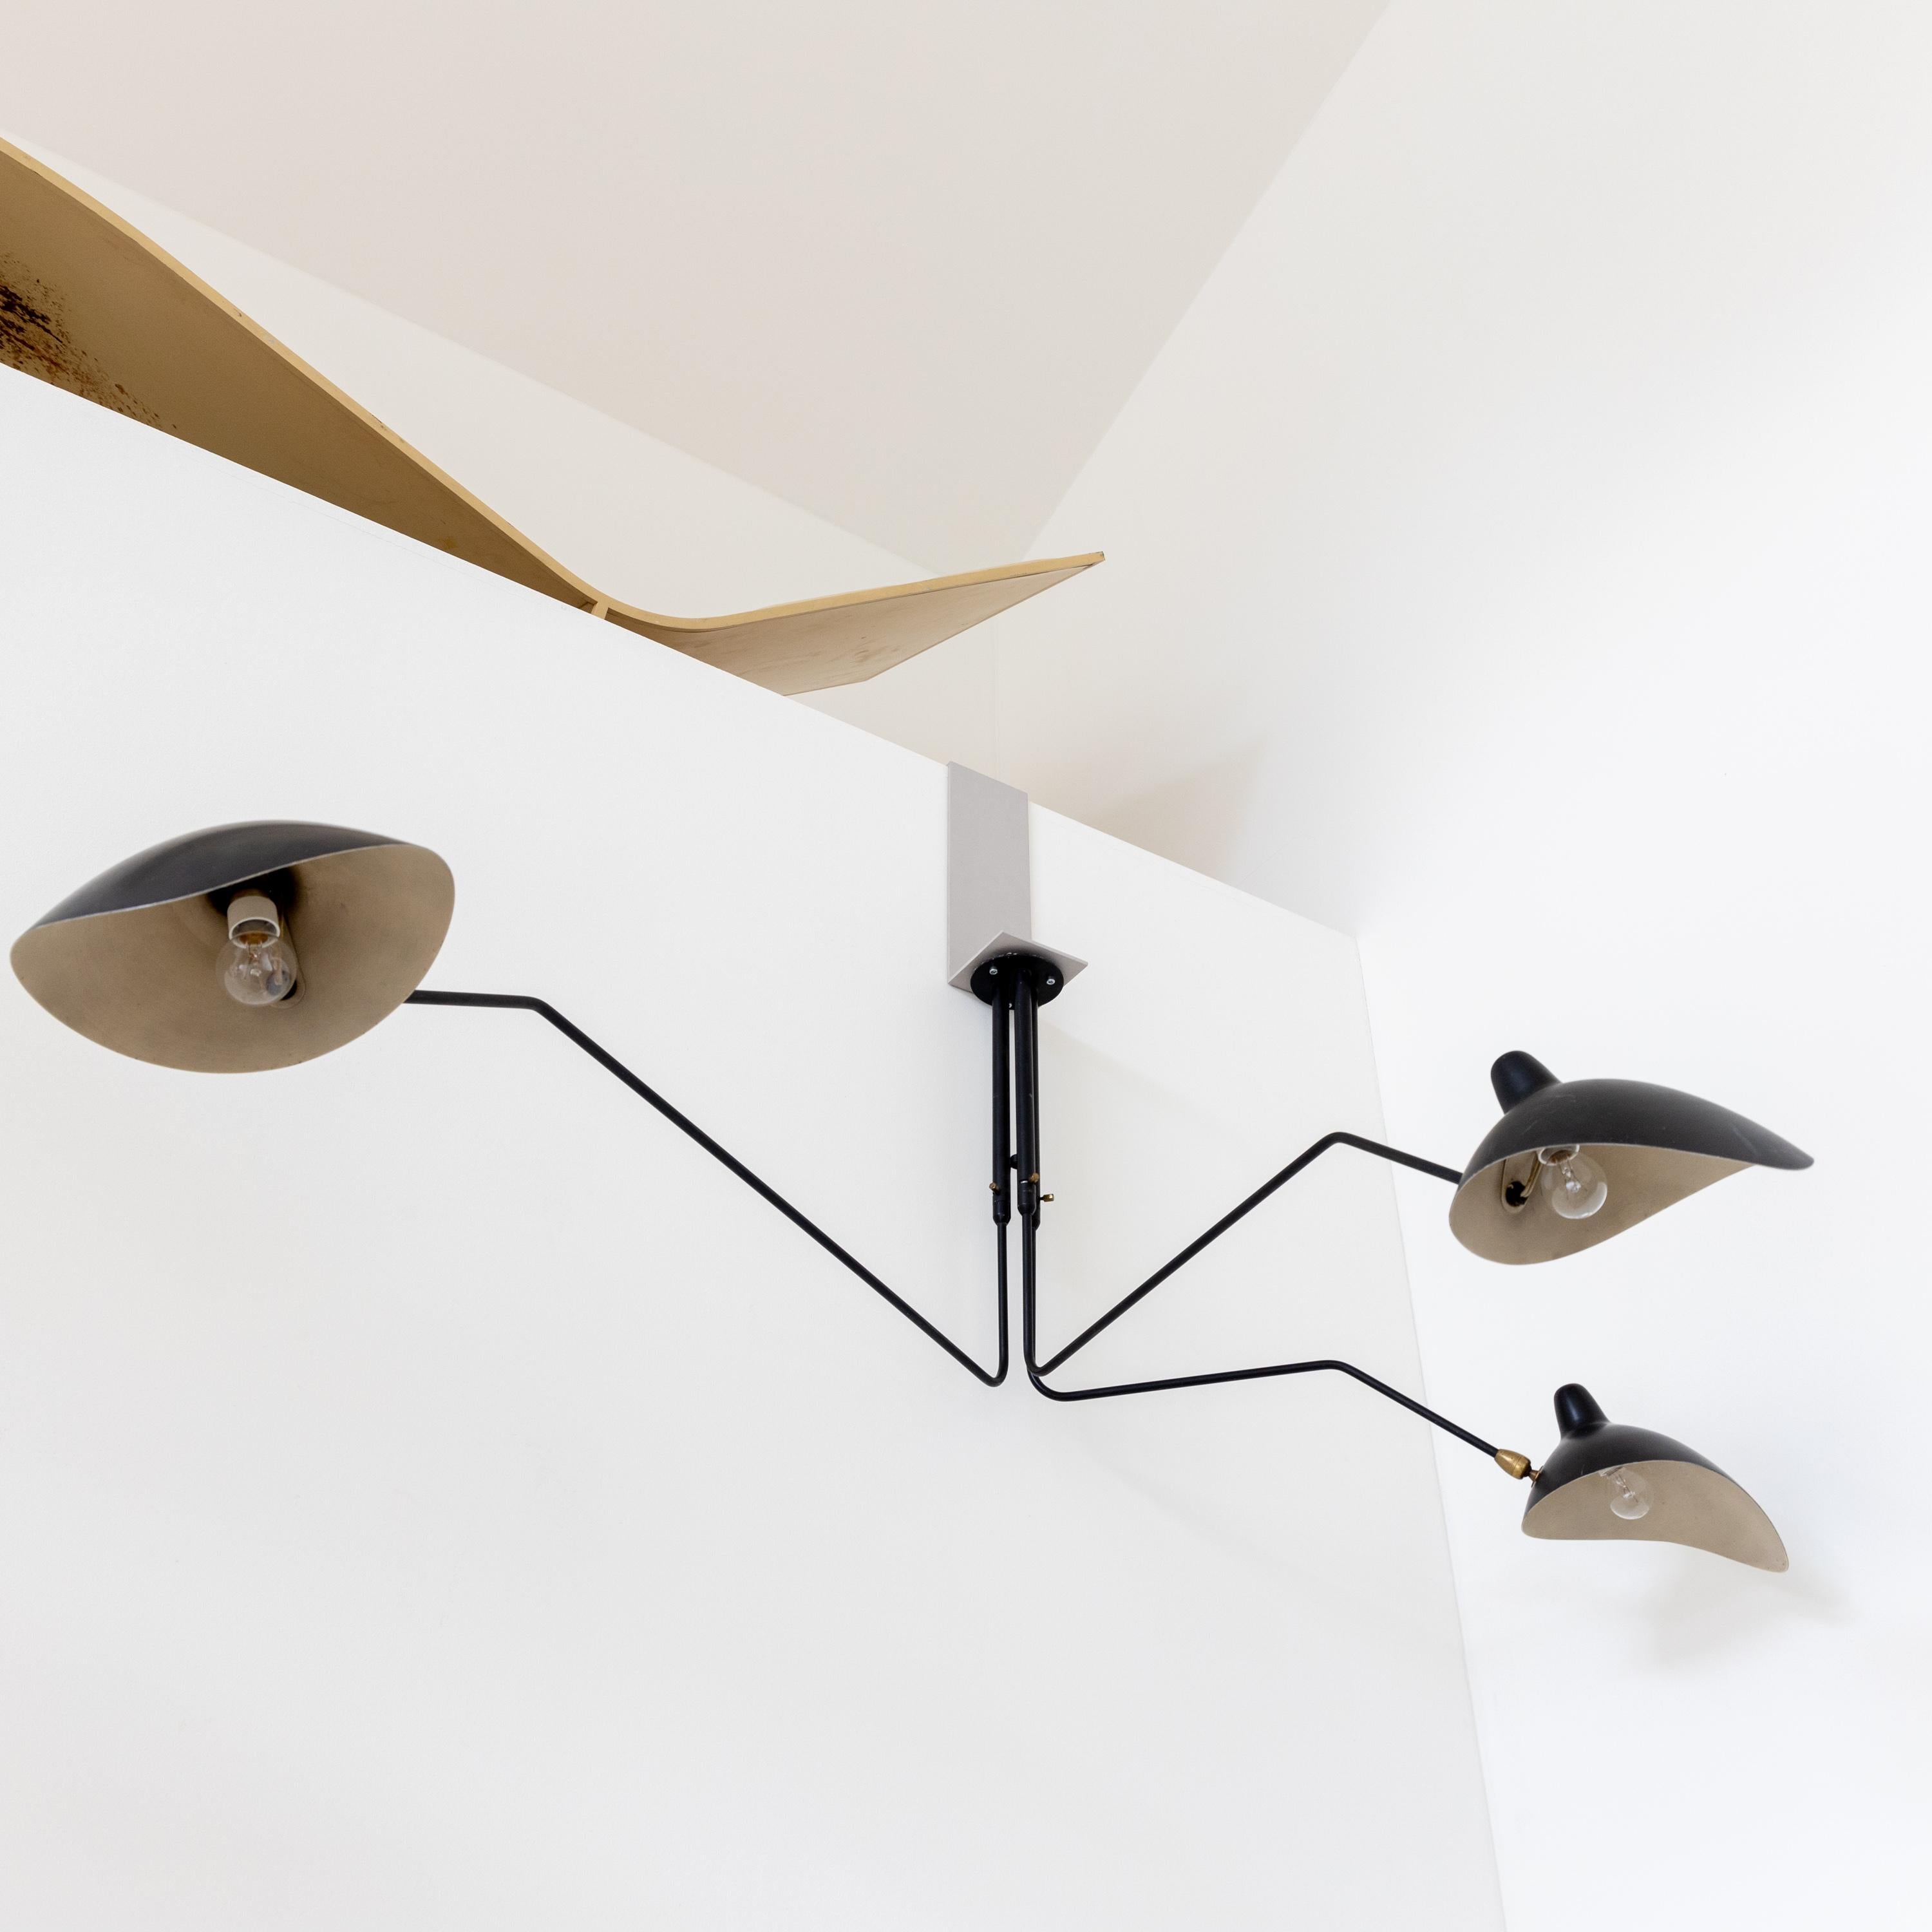 Mid-20th Century Ceiling Light with Three Pivoting Arms by Serge Mouille For Sale